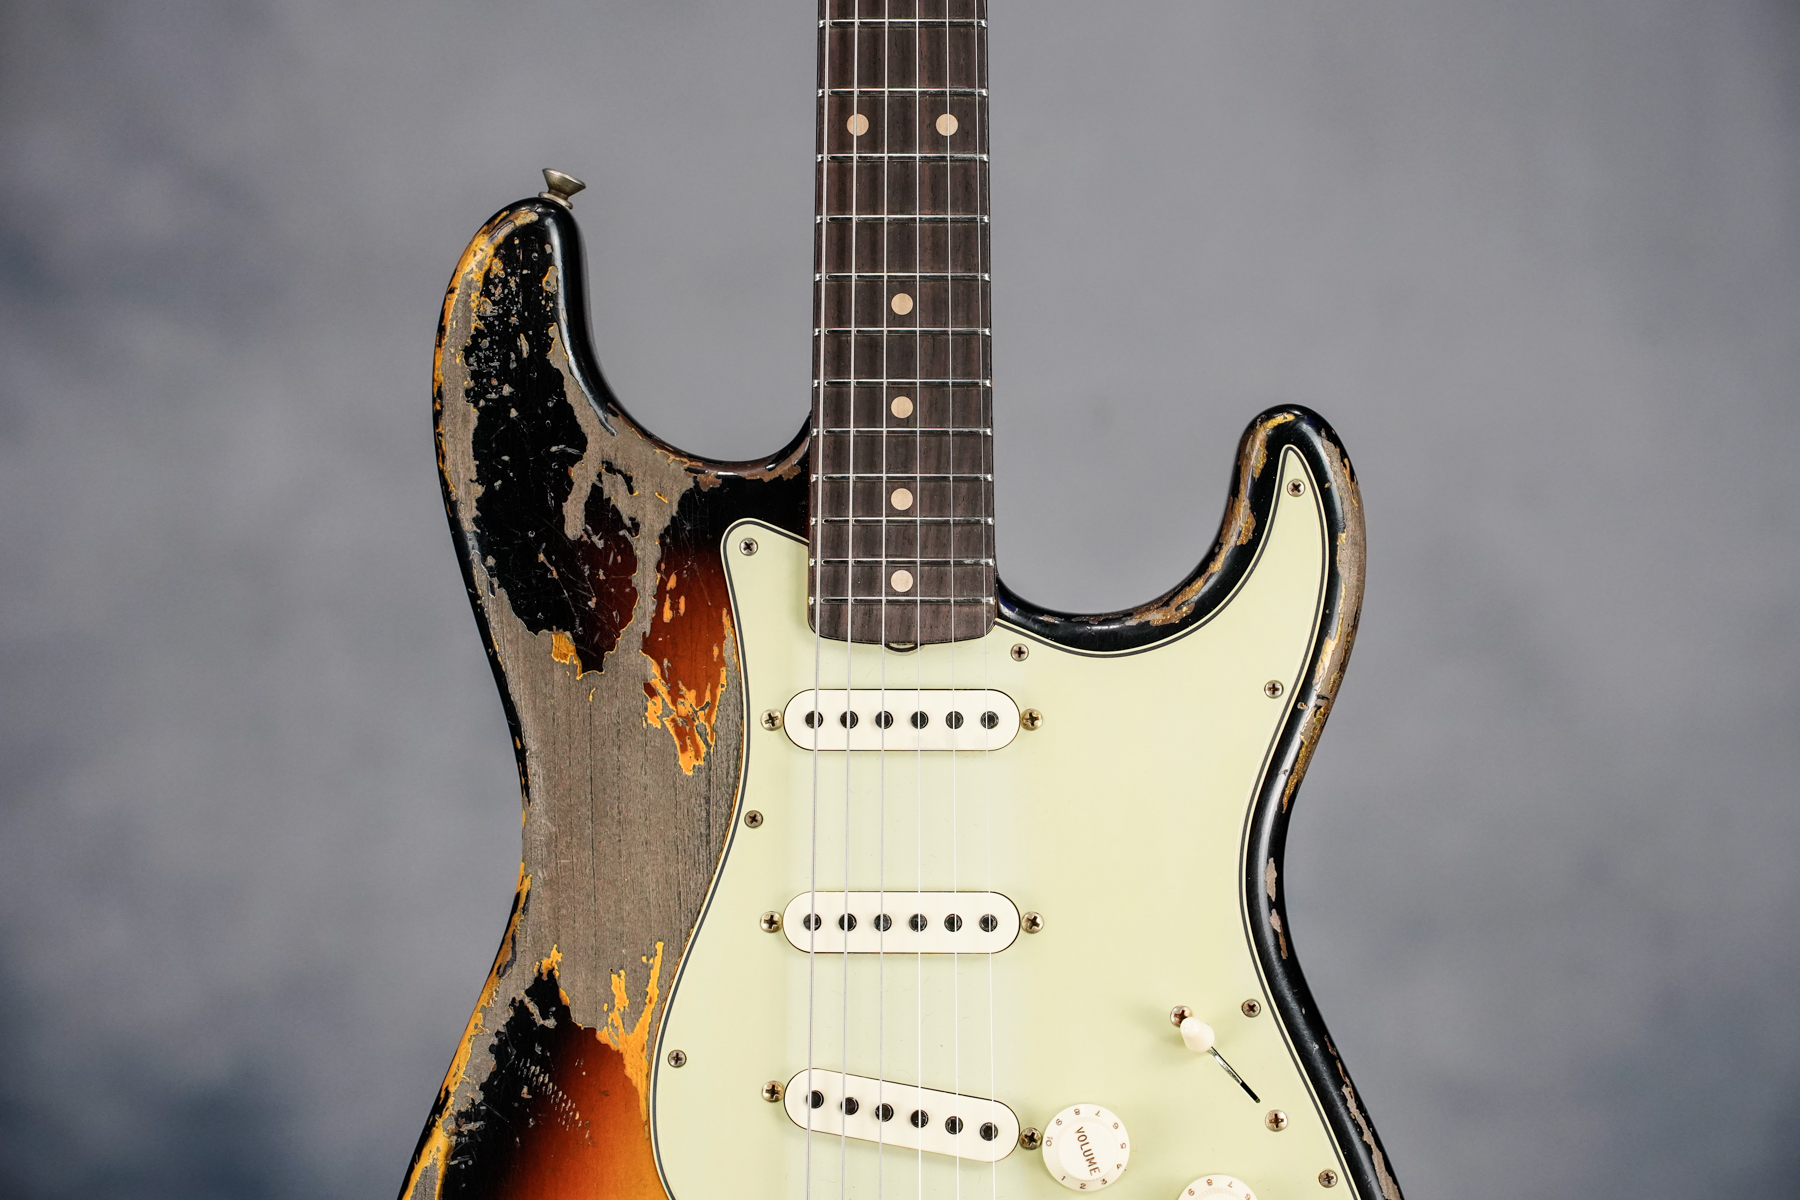 Limited Edition 1960 DualMag II Strat Heavy Relic - Faded Aged 3 Color Sunburst